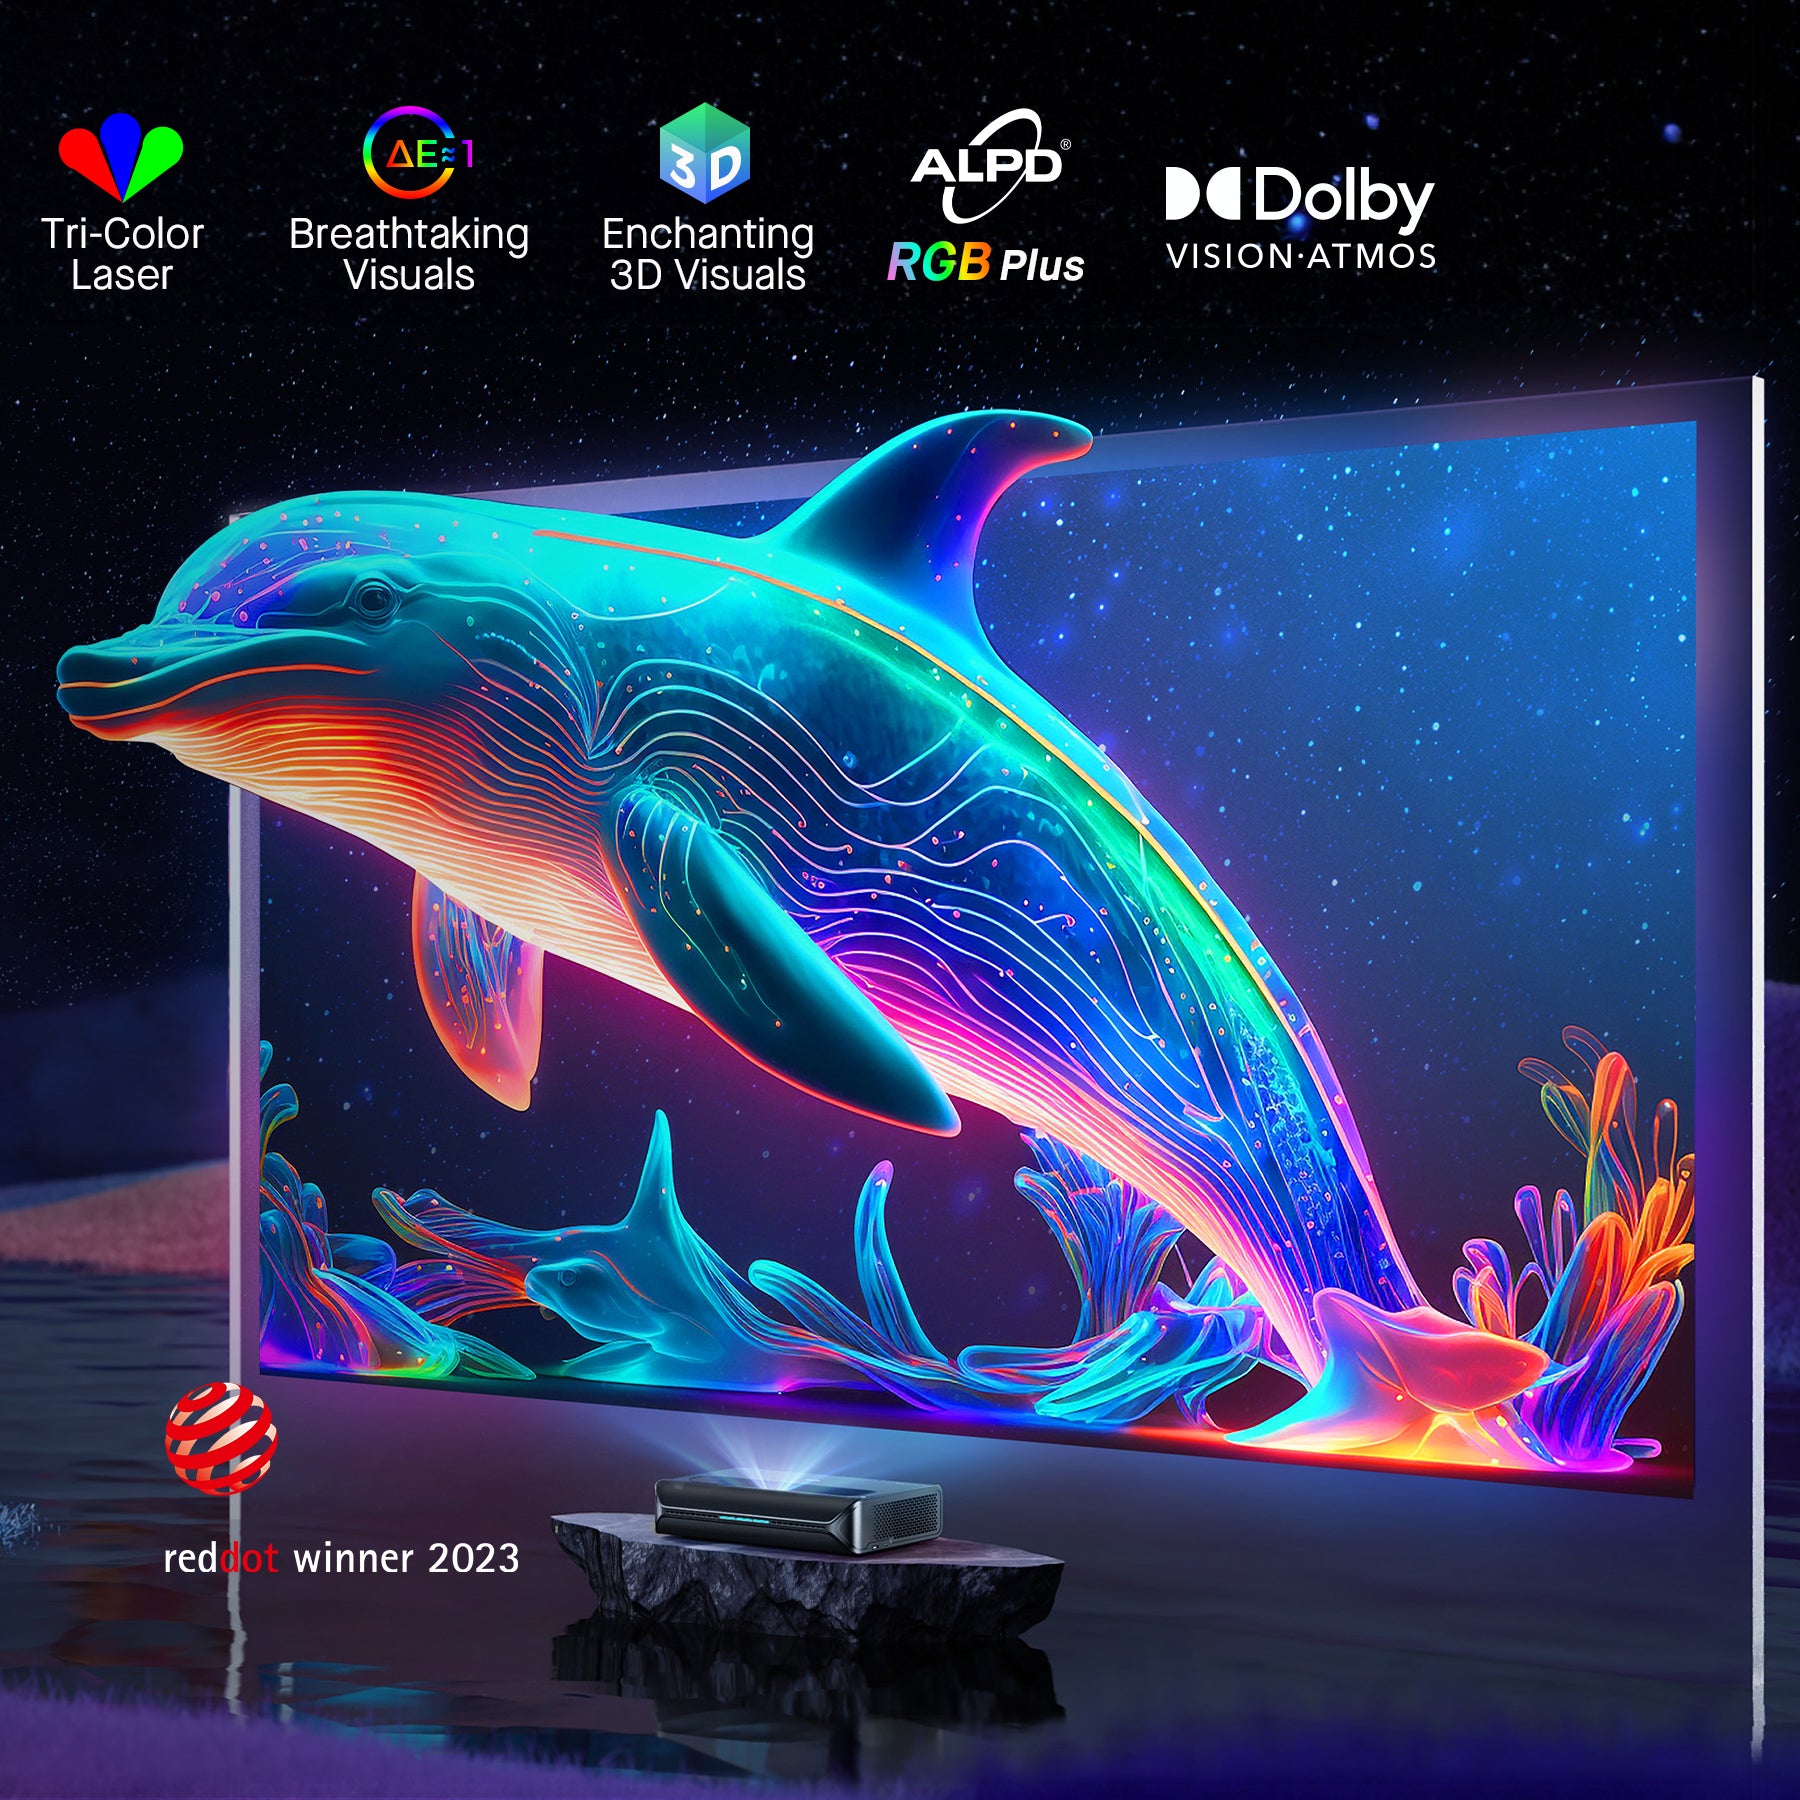 Aurora Pro projects lifelike dolphins on the screen against a dreamy backdrop.